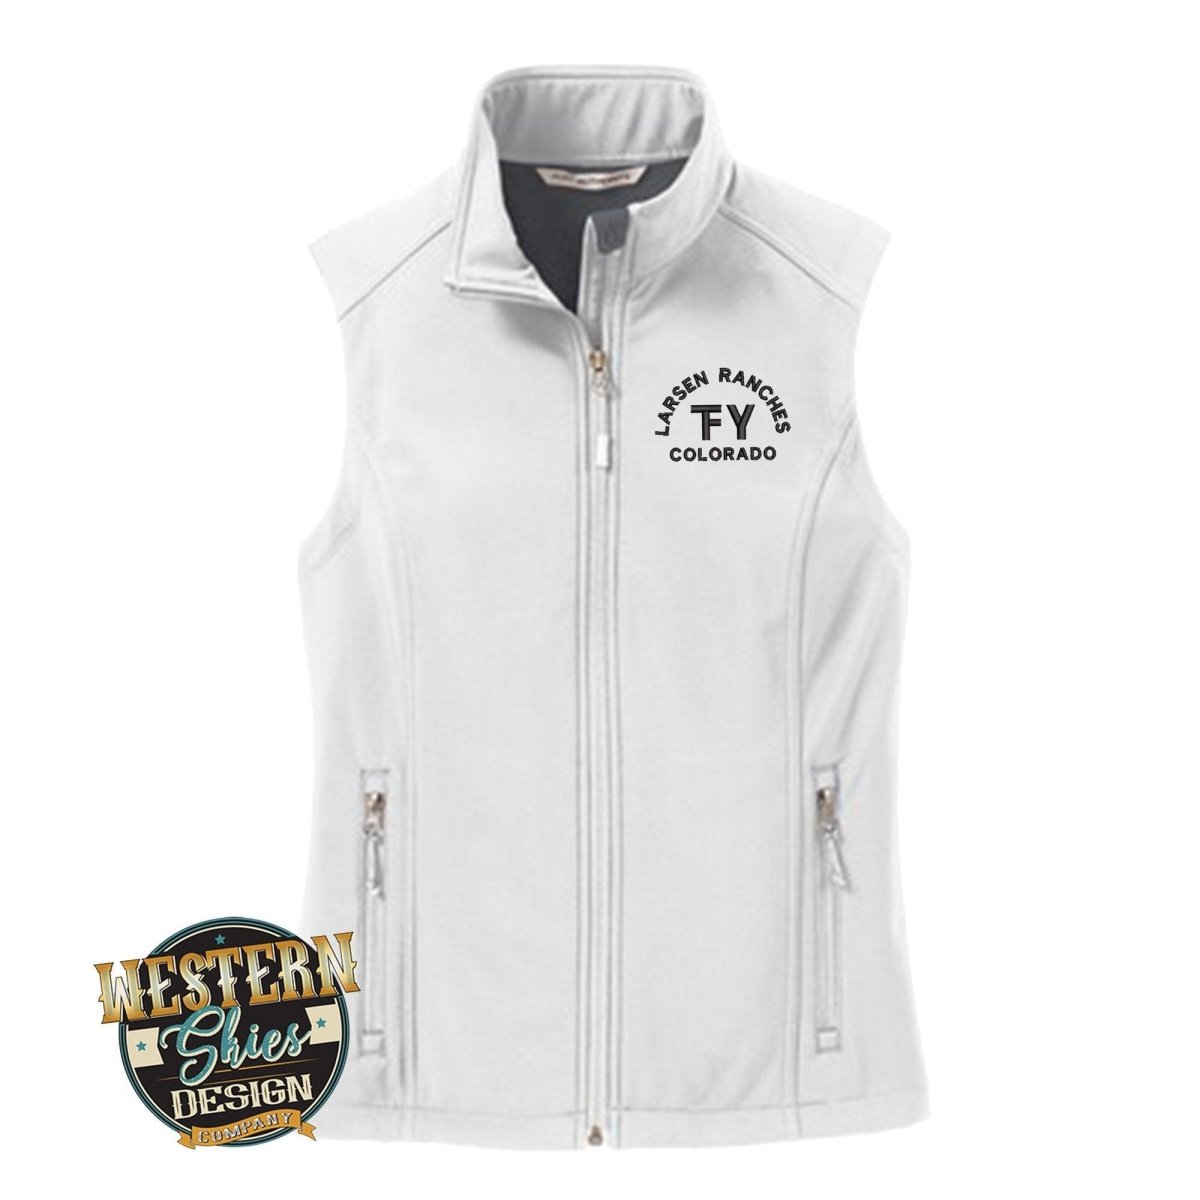 Port Authority® Womens Core Soft Shell Vest - Western Skies Design Company